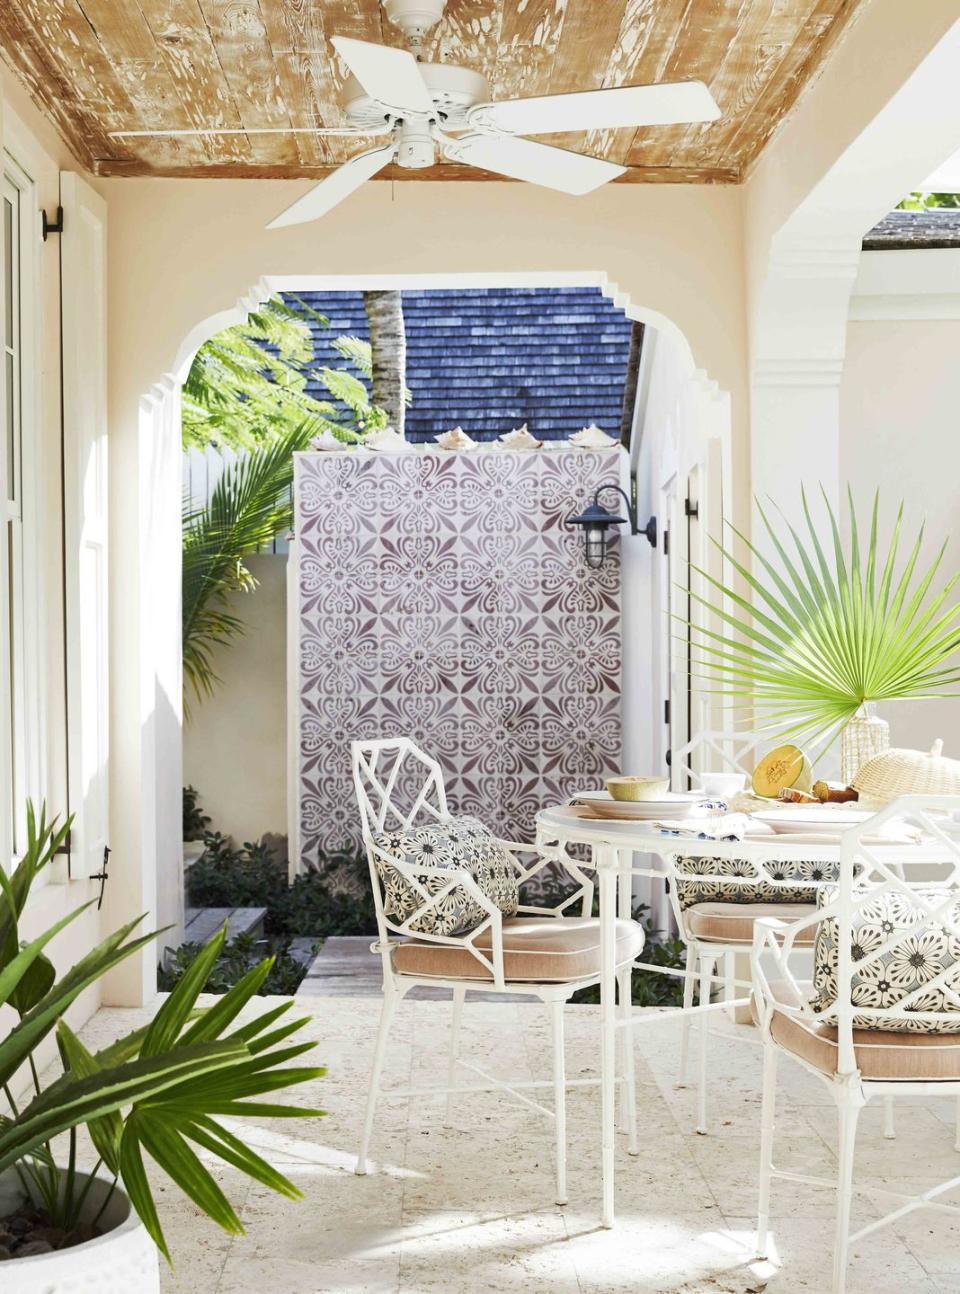 the outdoor shower’s portuguese cement tilework reads like antique wallpaper against the white outdoor dining furnture